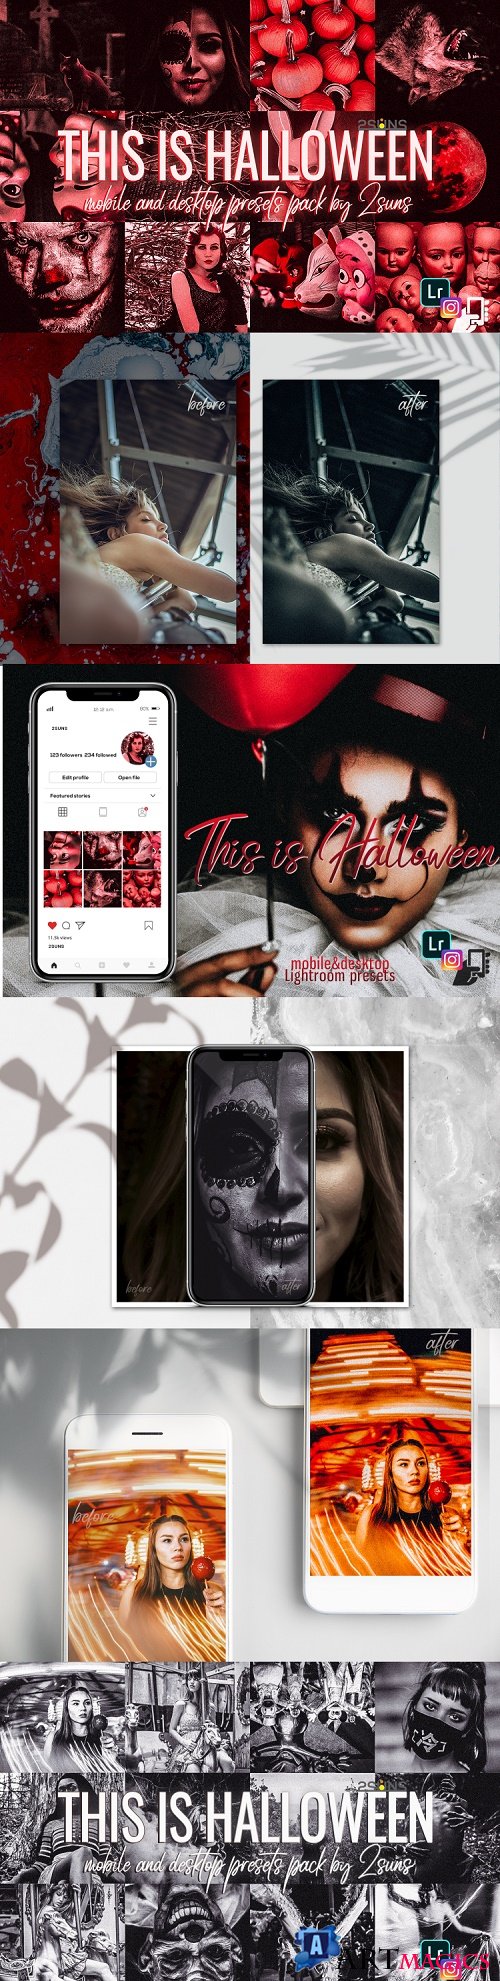 This is halloween presets horror creepy scary clown editing - 358768